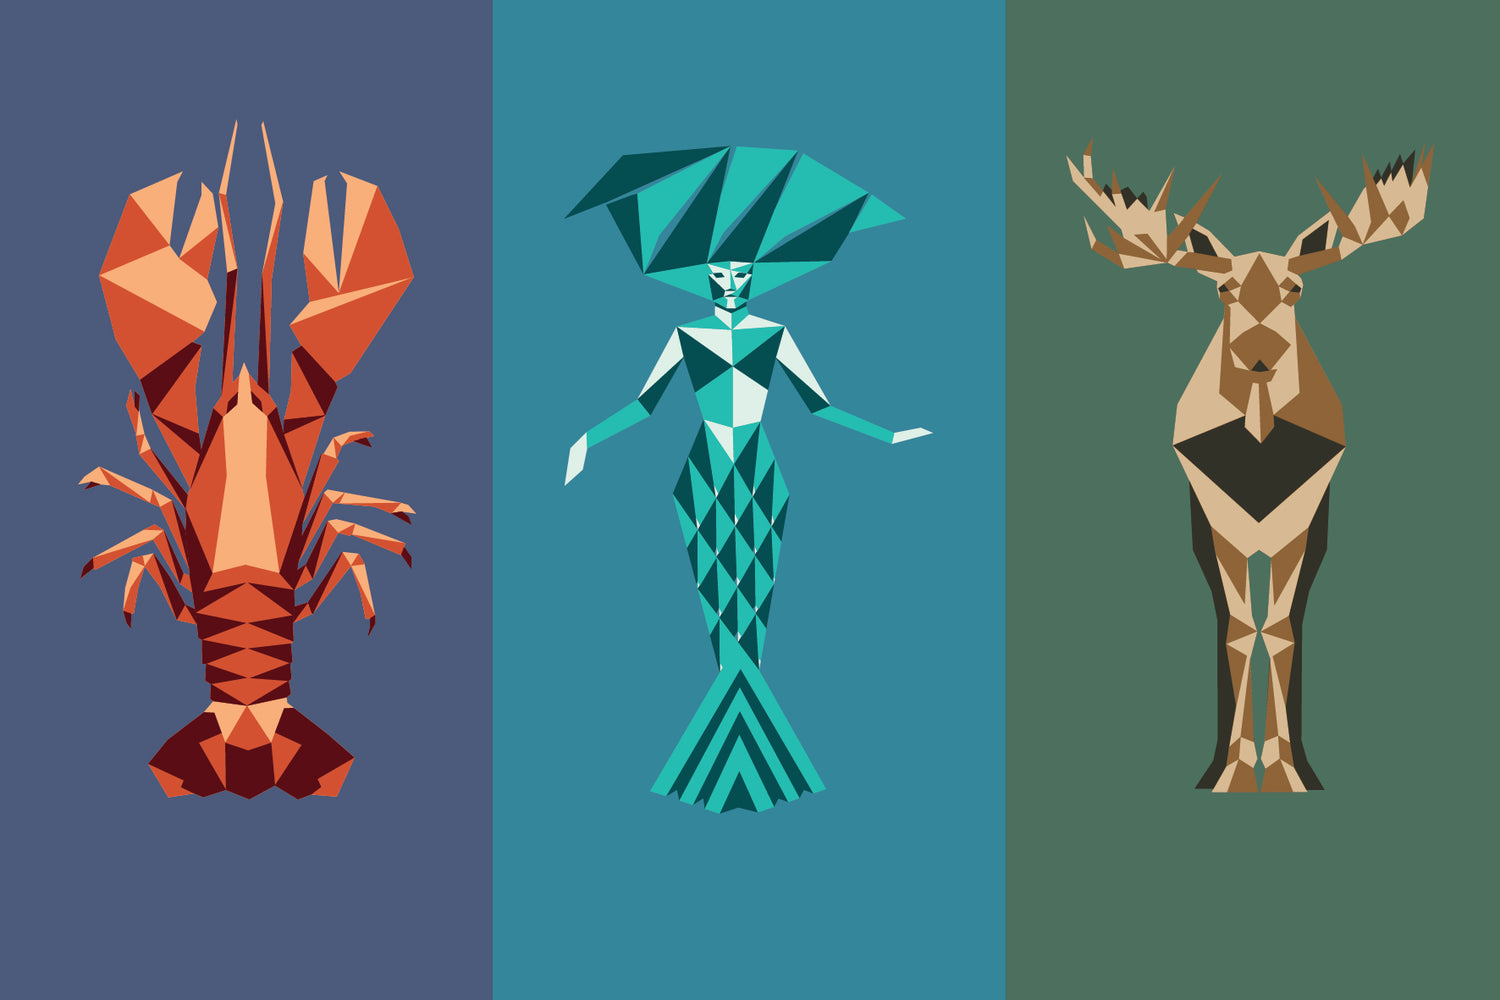 Lobster, Mermaid, Moose in simplified geometric forms and faceted shaded colors.